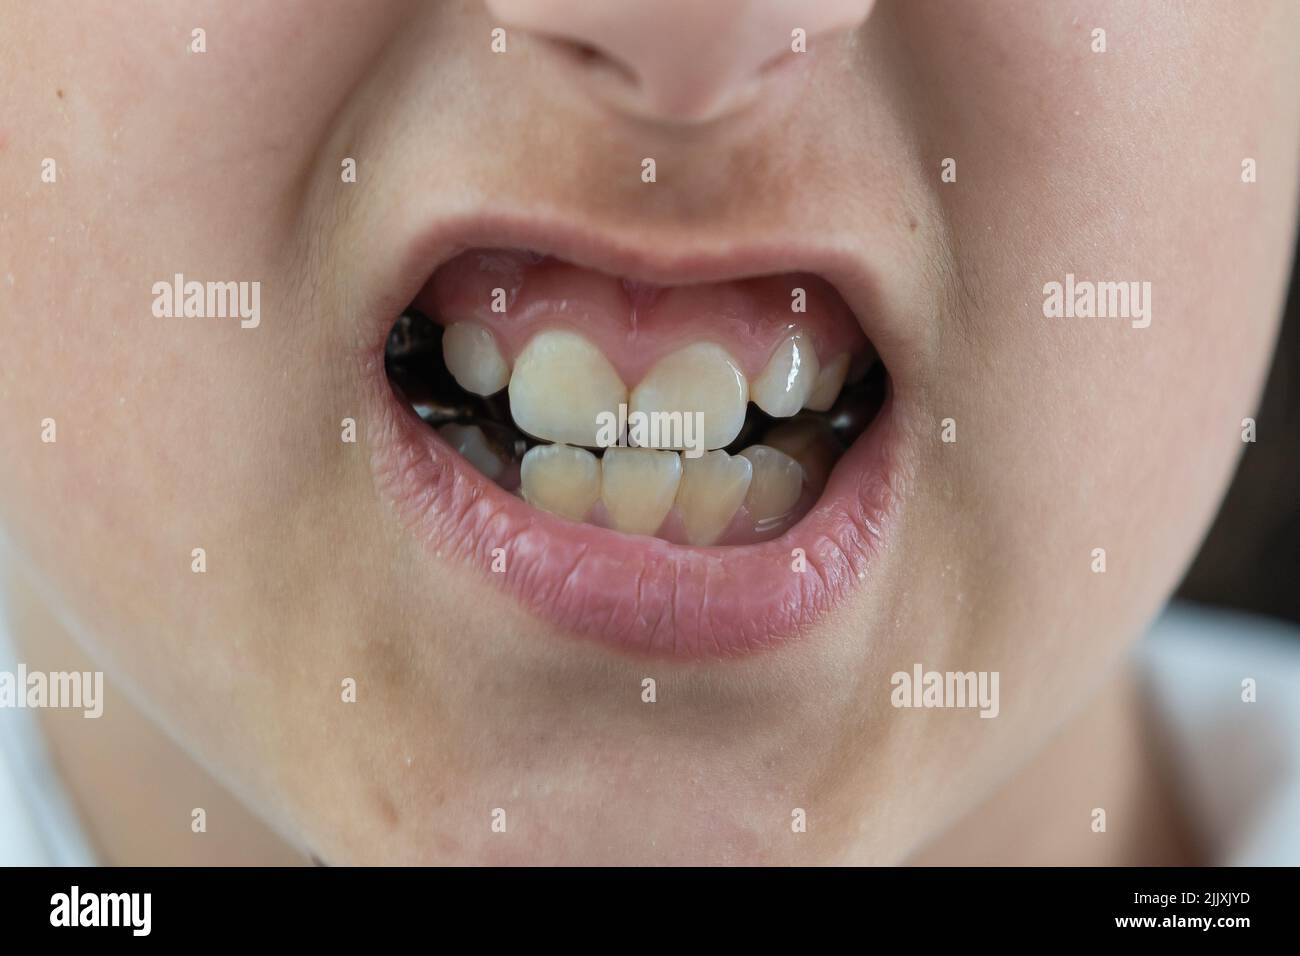 Adult permanent teeth coming in front of the child baby teeth: shark teeth. Little girl's open mouth. consultation of dentist. problem. Stock Photo